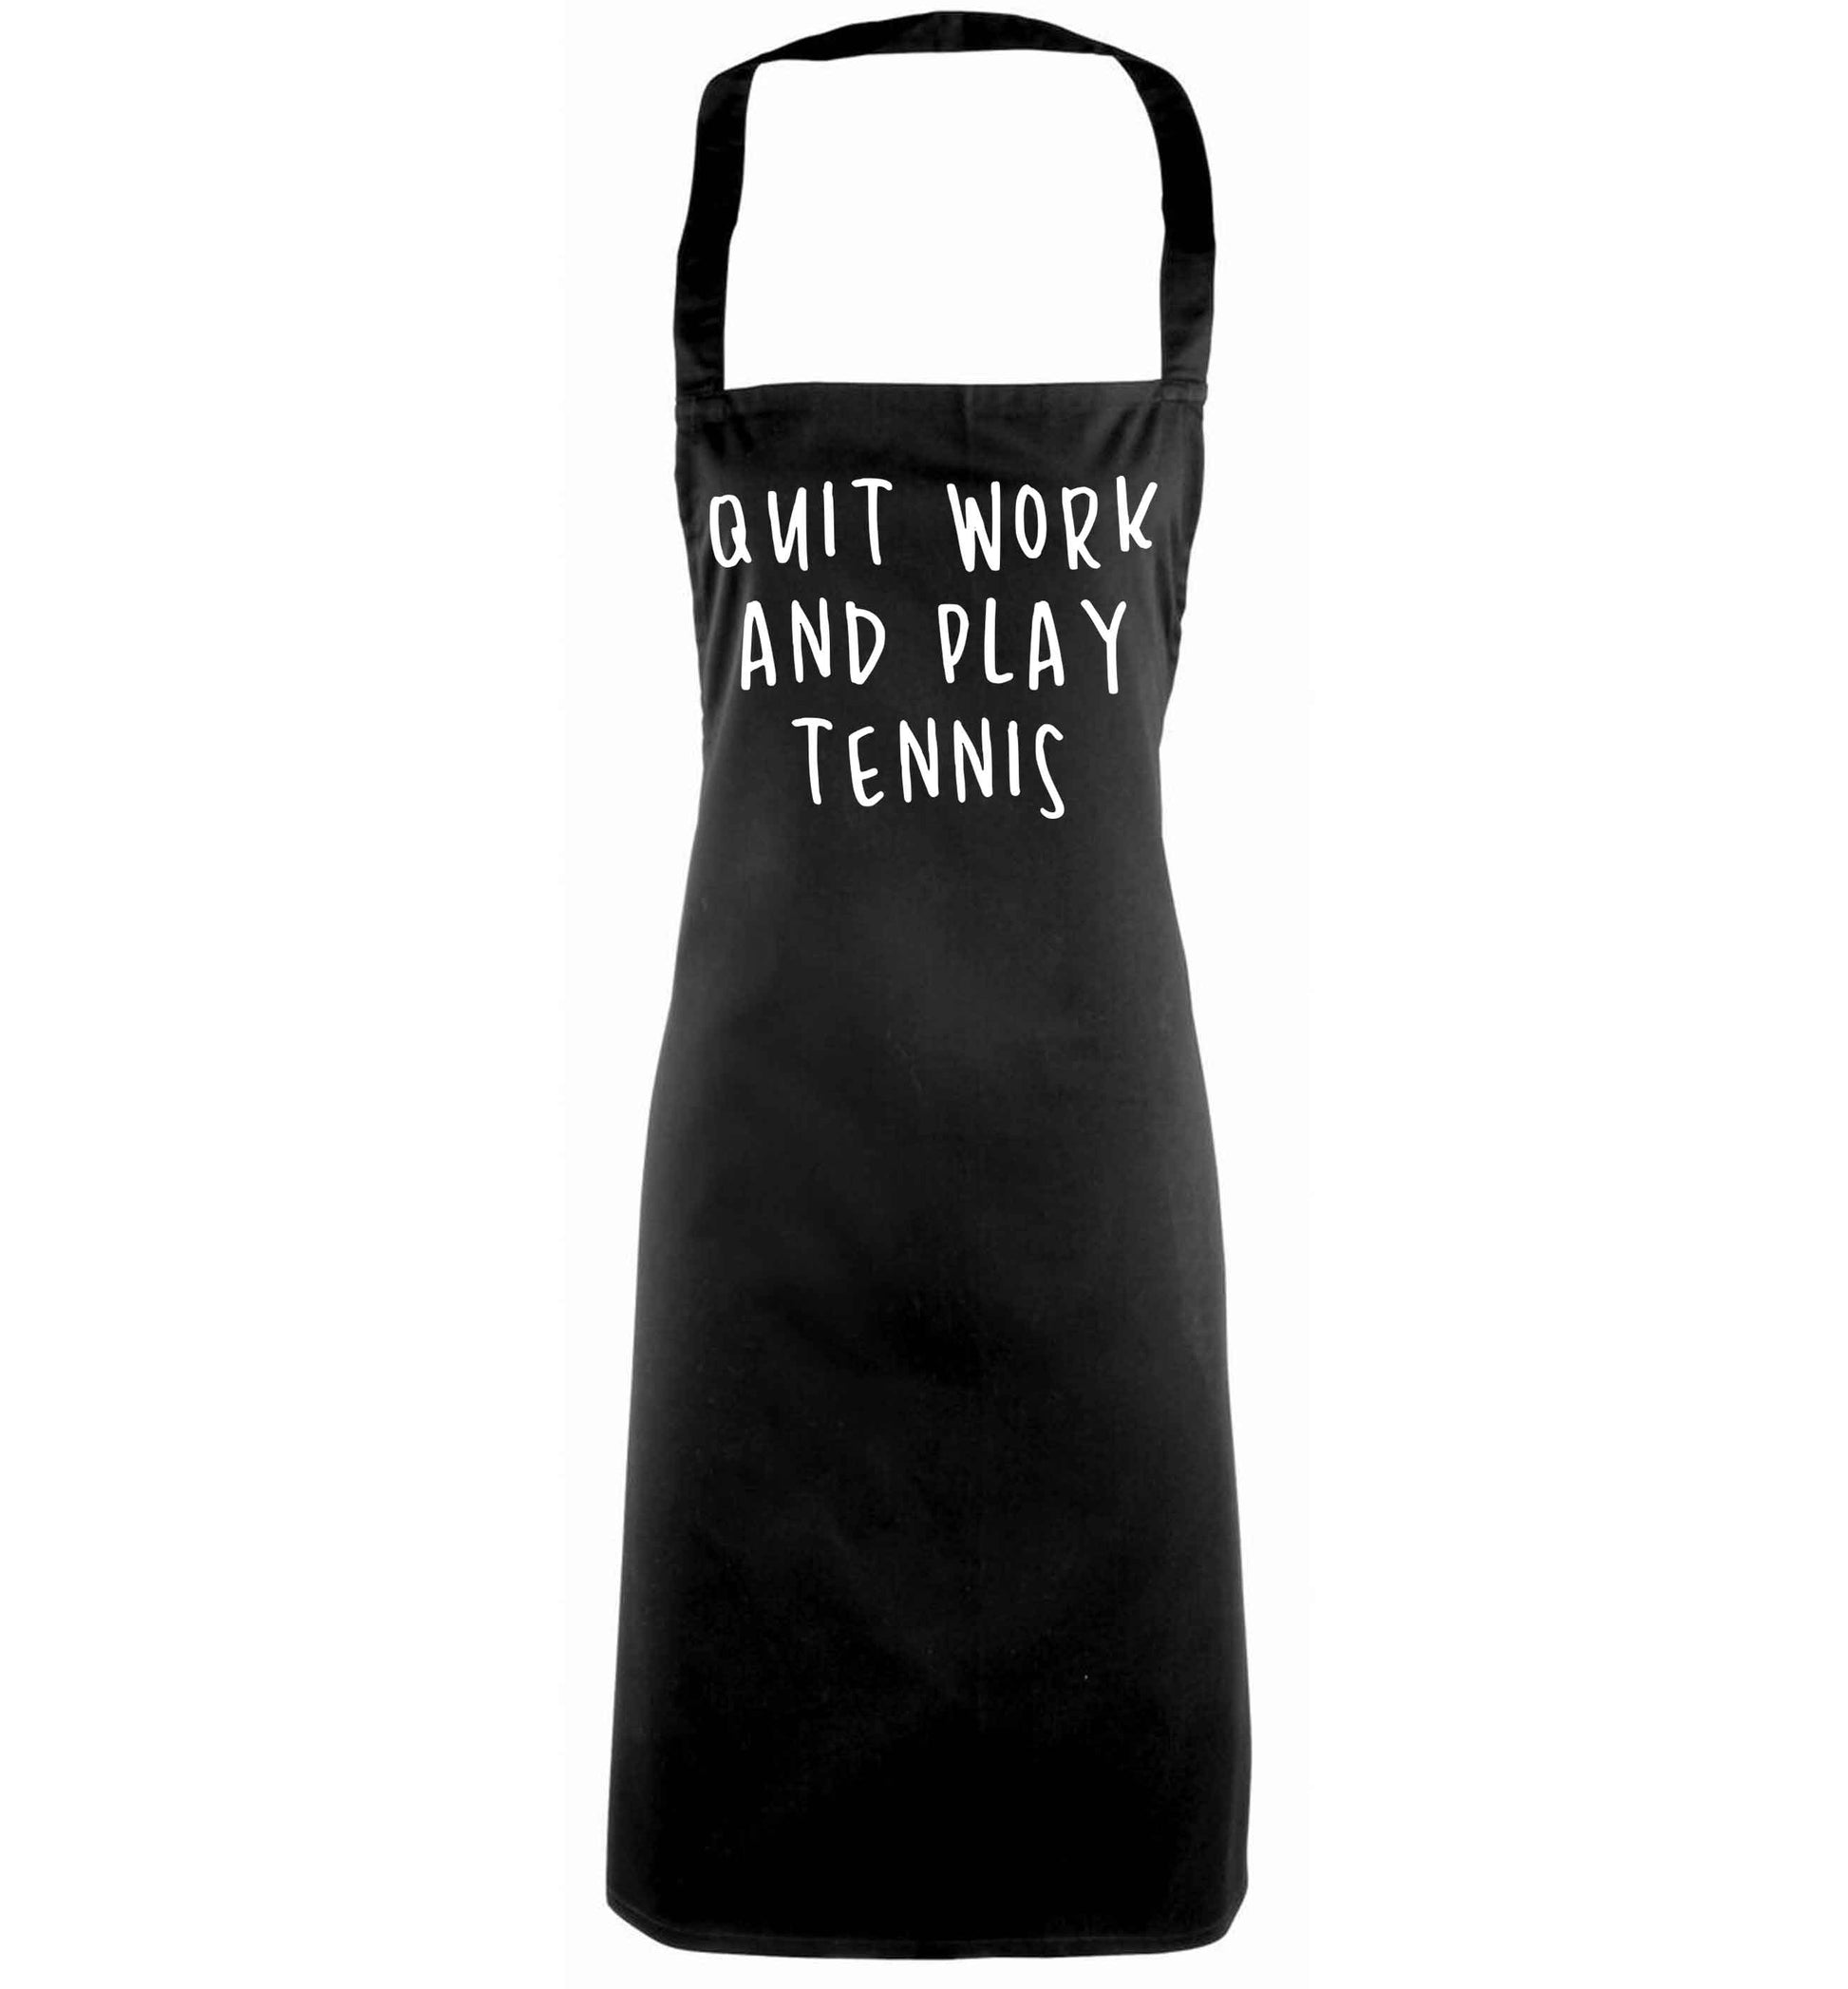 Quit work and play tennis black apron